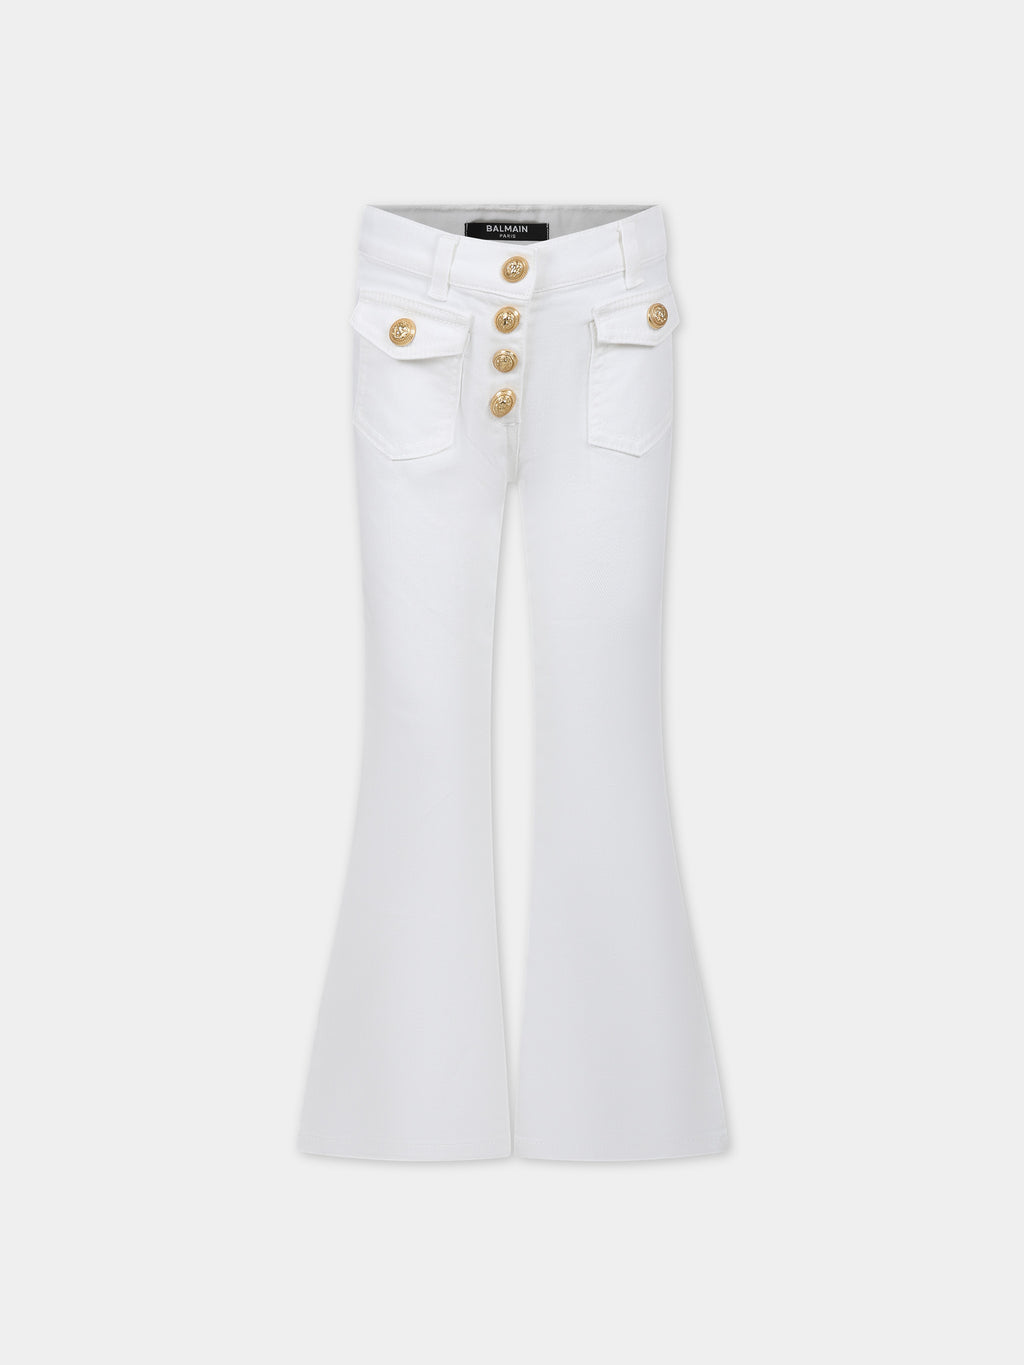 White jeans for girl with gold buttons